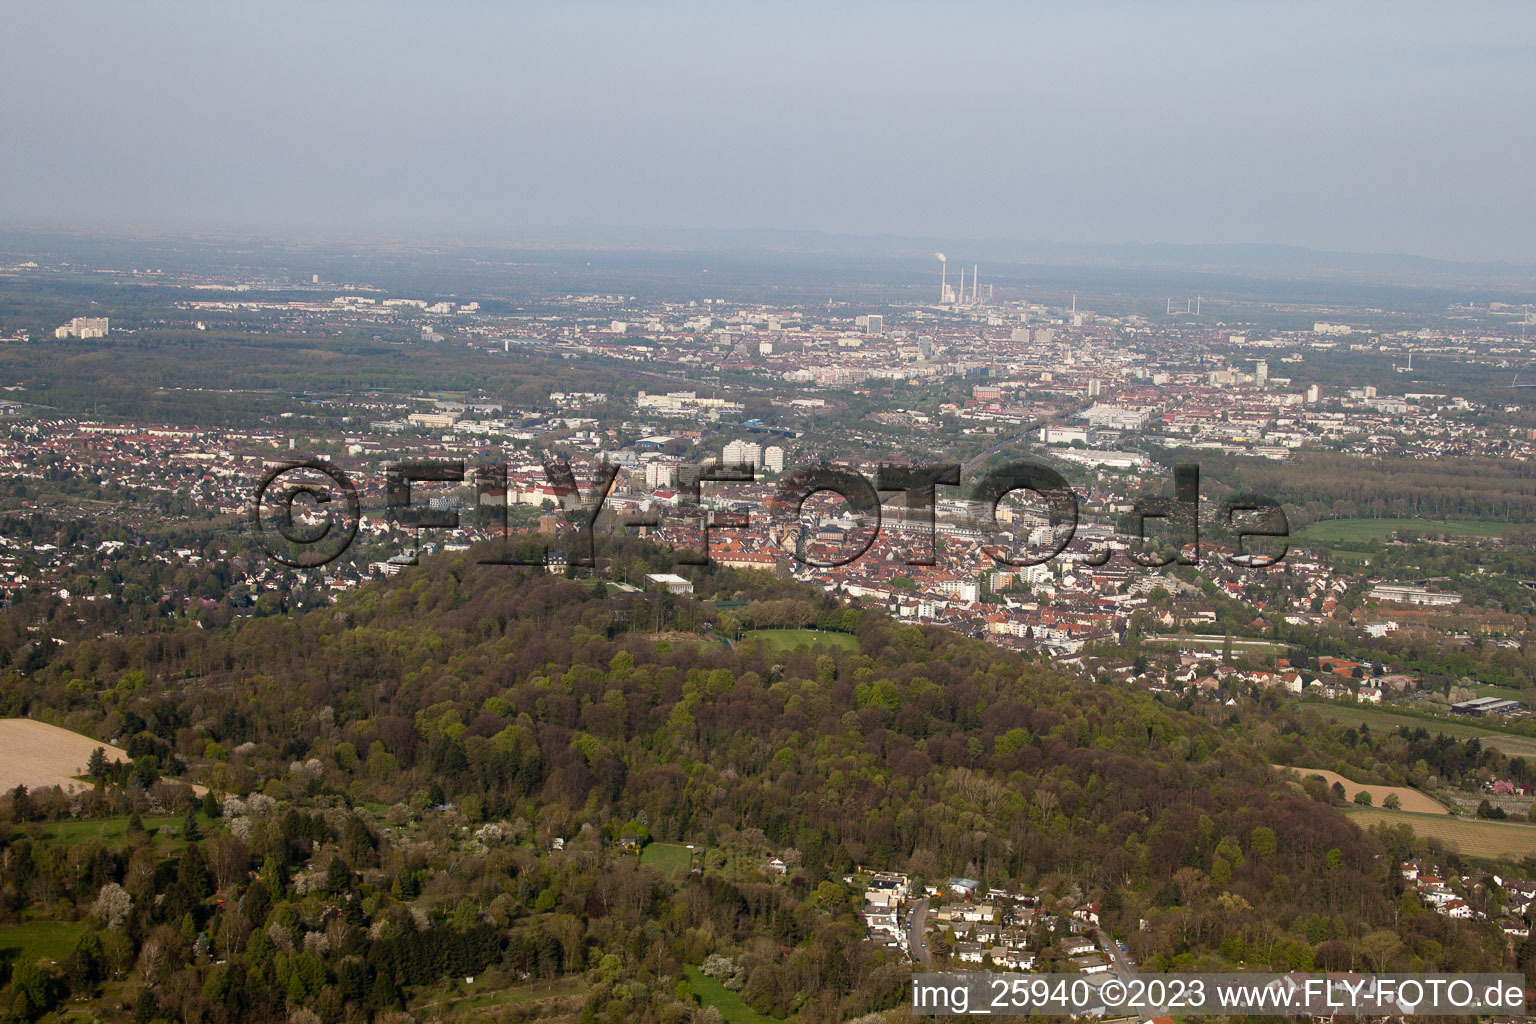 Turmberg from the east in the district Durlach in Karlsruhe in the state Baden-Wuerttemberg, Germany